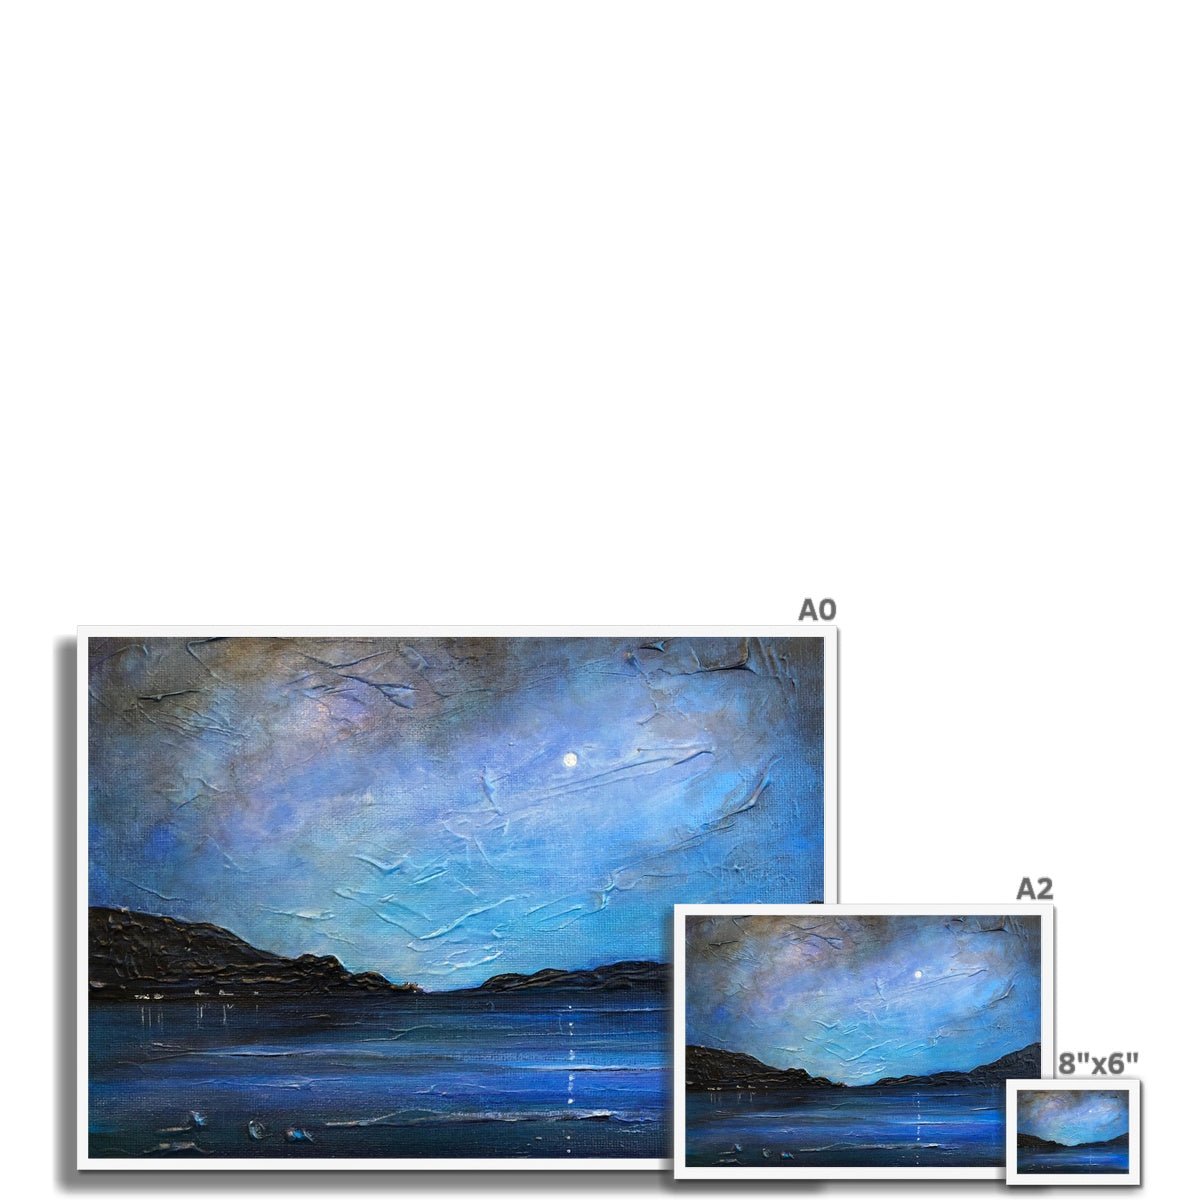 Loch Ness Moonlight Painting | Framed Prints From Scotland-Framed Prints-Scottish Lochs & Mountains Art Gallery-Paintings, Prints, Homeware, Art Gifts From Scotland By Scottish Artist Kevin Hunter